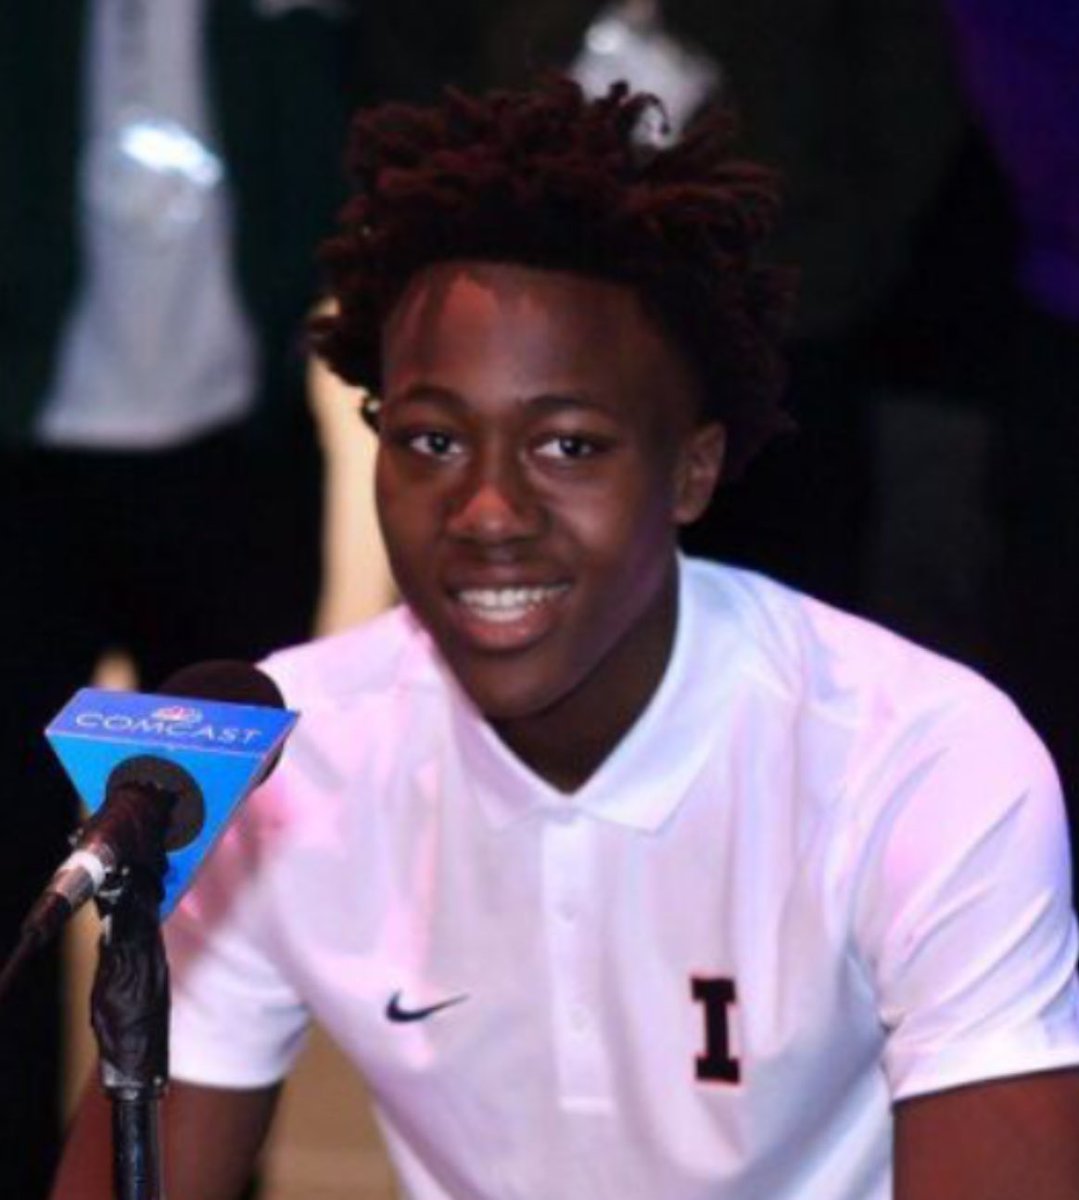 The Illinois Basketball resurgence started right here with this Morgan Park PG And now Most B1G wins over the last 5 years BTT Champ x 2 (2021, 2024) B1G Regular Title (2022) 4 NCAAs (2021-2024) Elite 8 Appearance